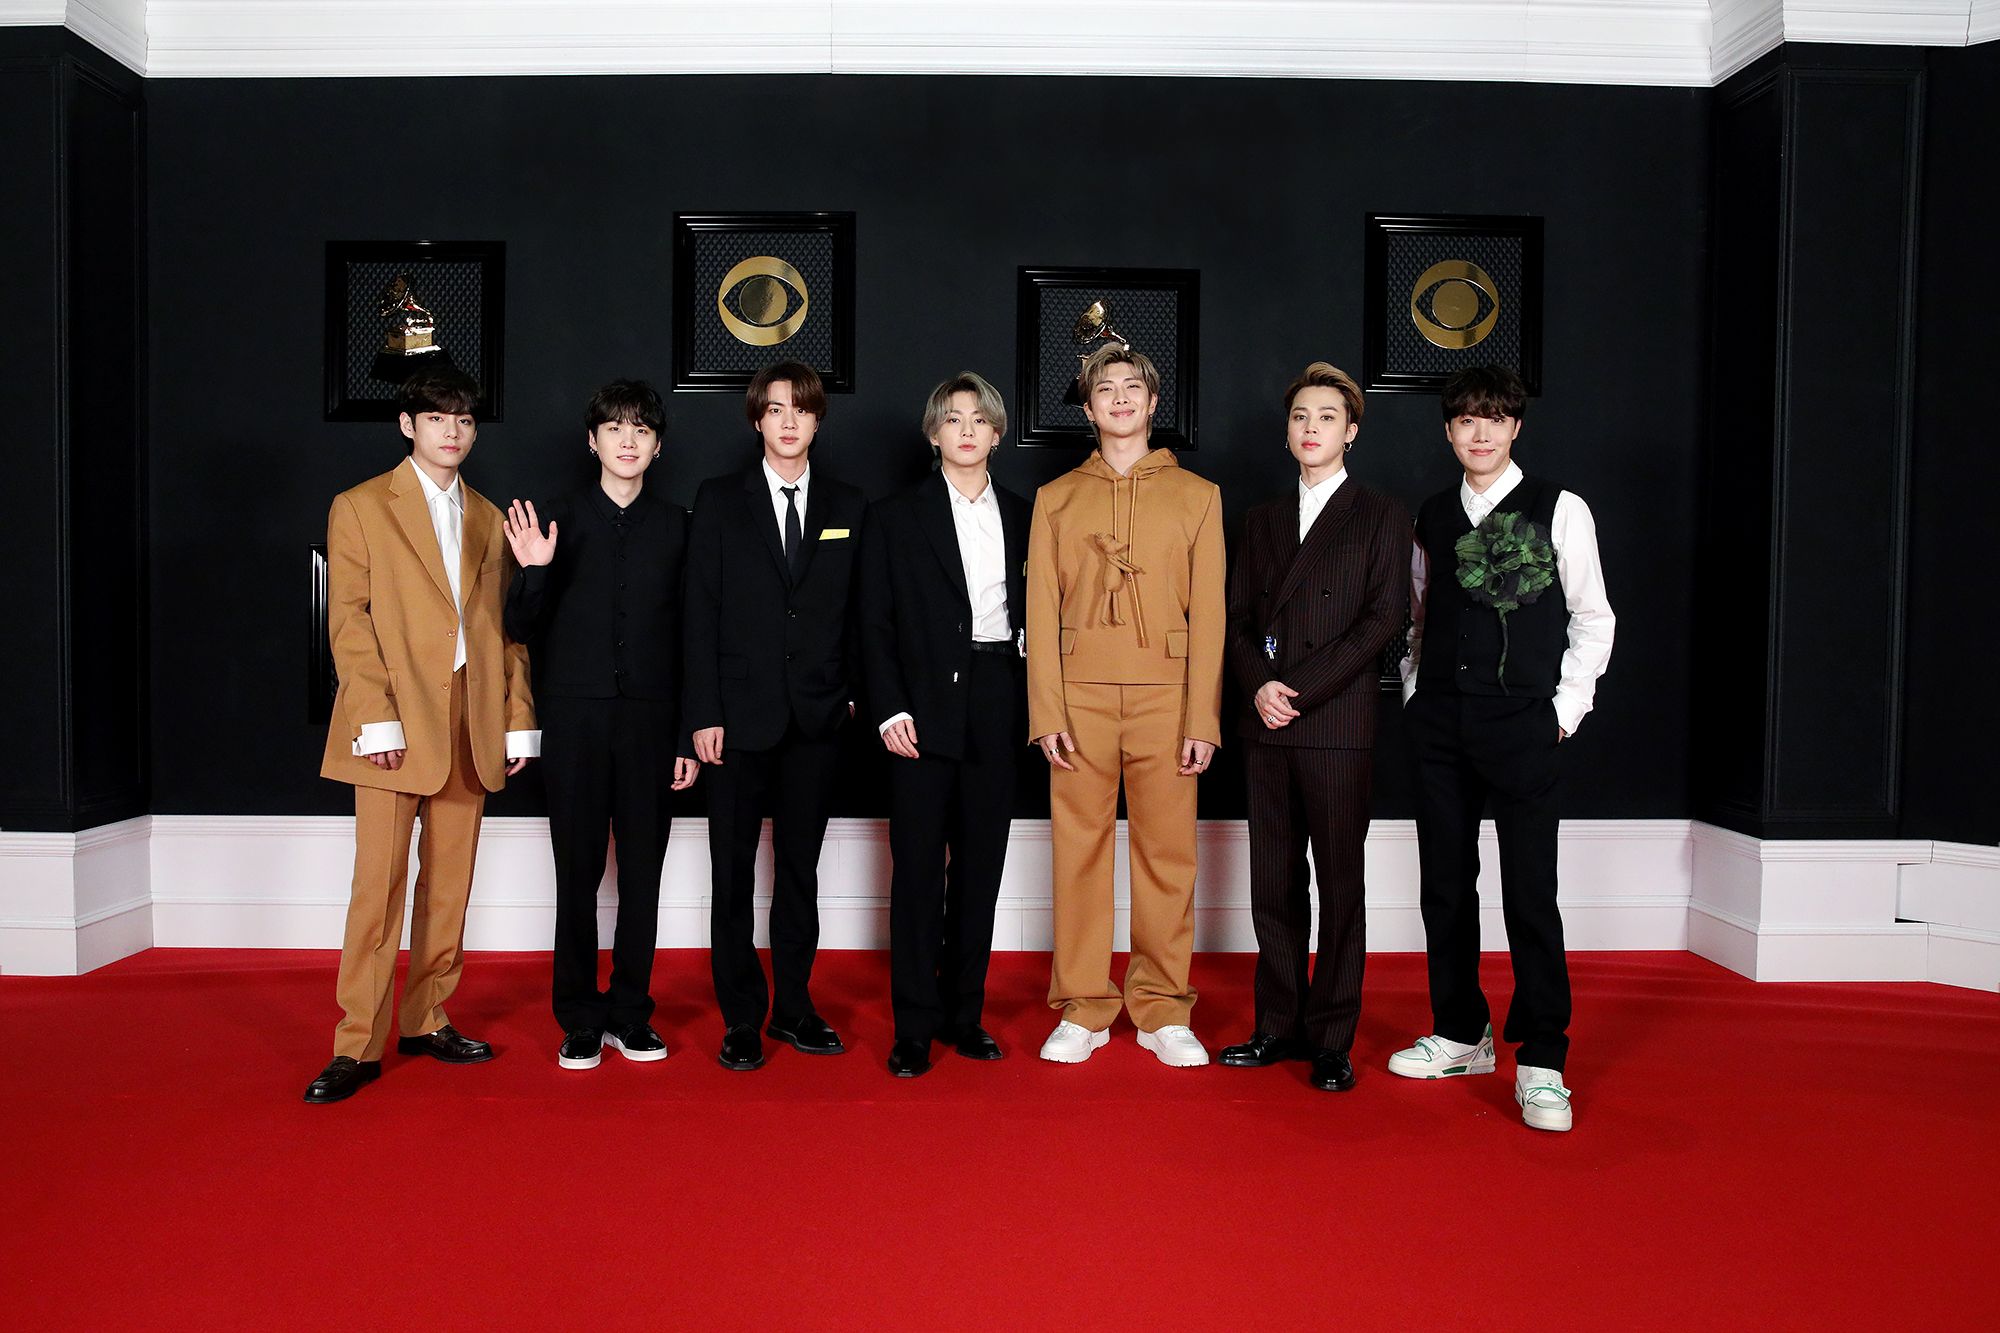 BTS Makes it to Grammys Together As a Group After Jungkook COVID